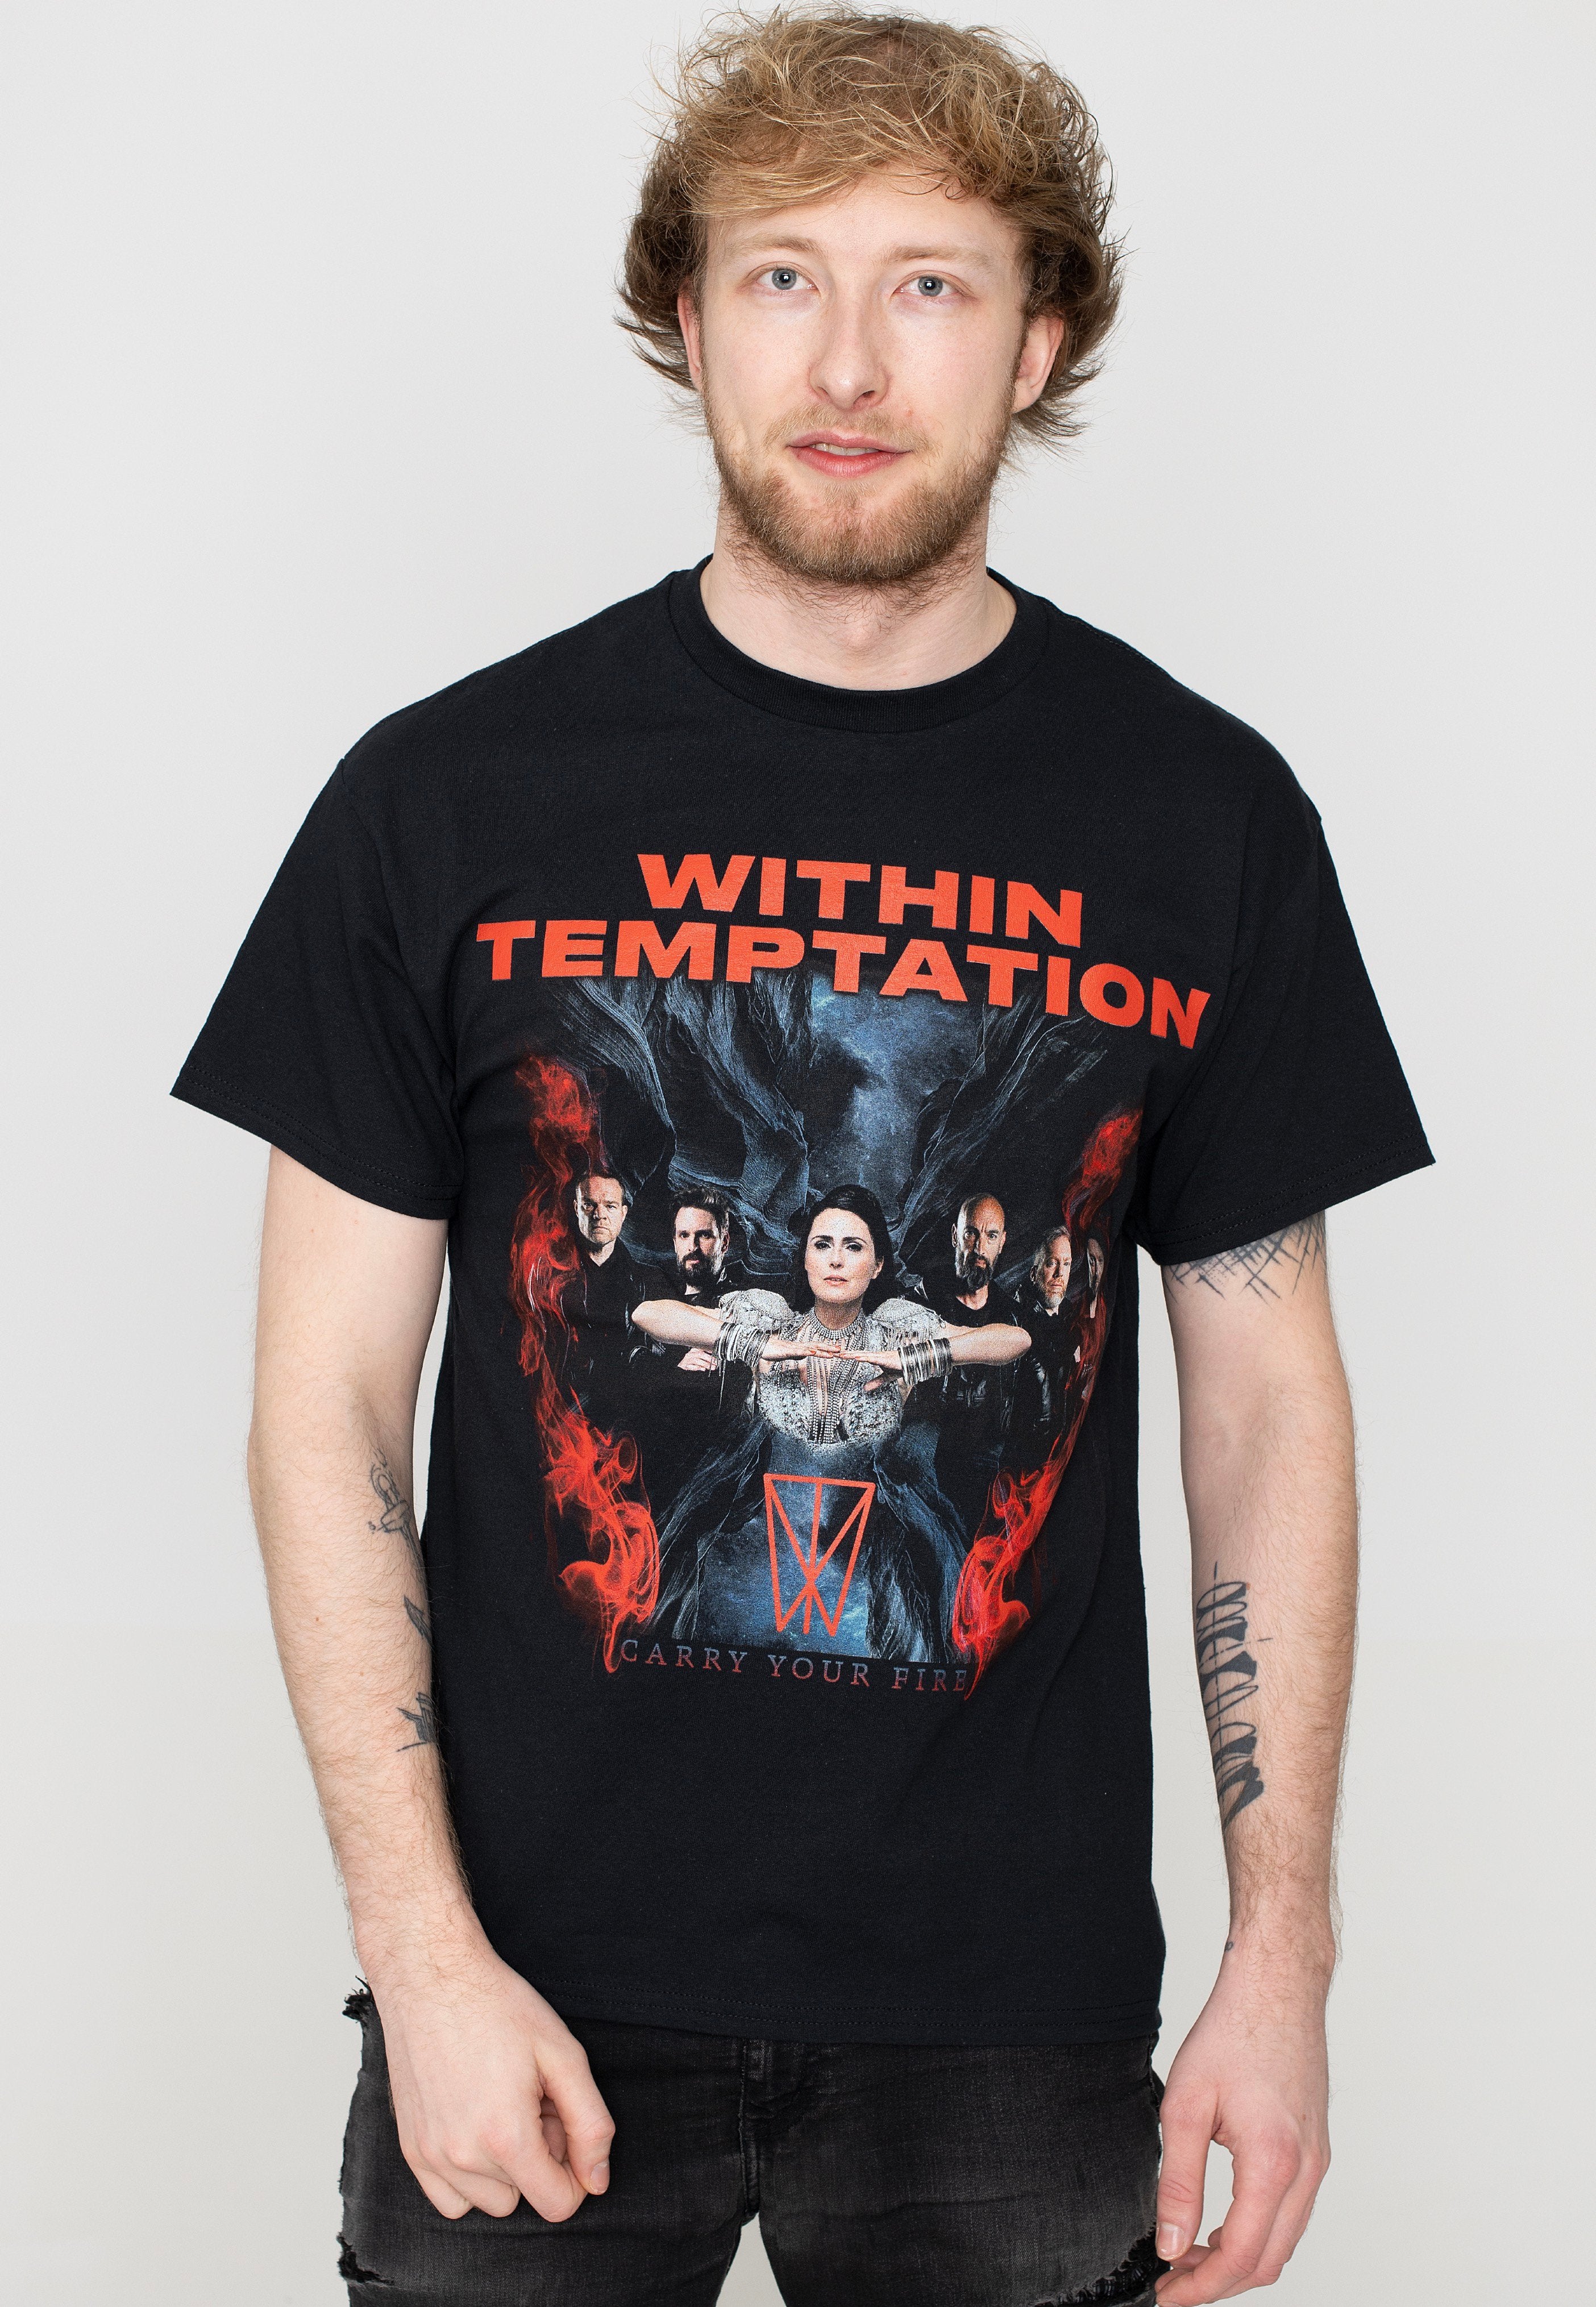 Within Temptation - Carry Fire - T-Shirt